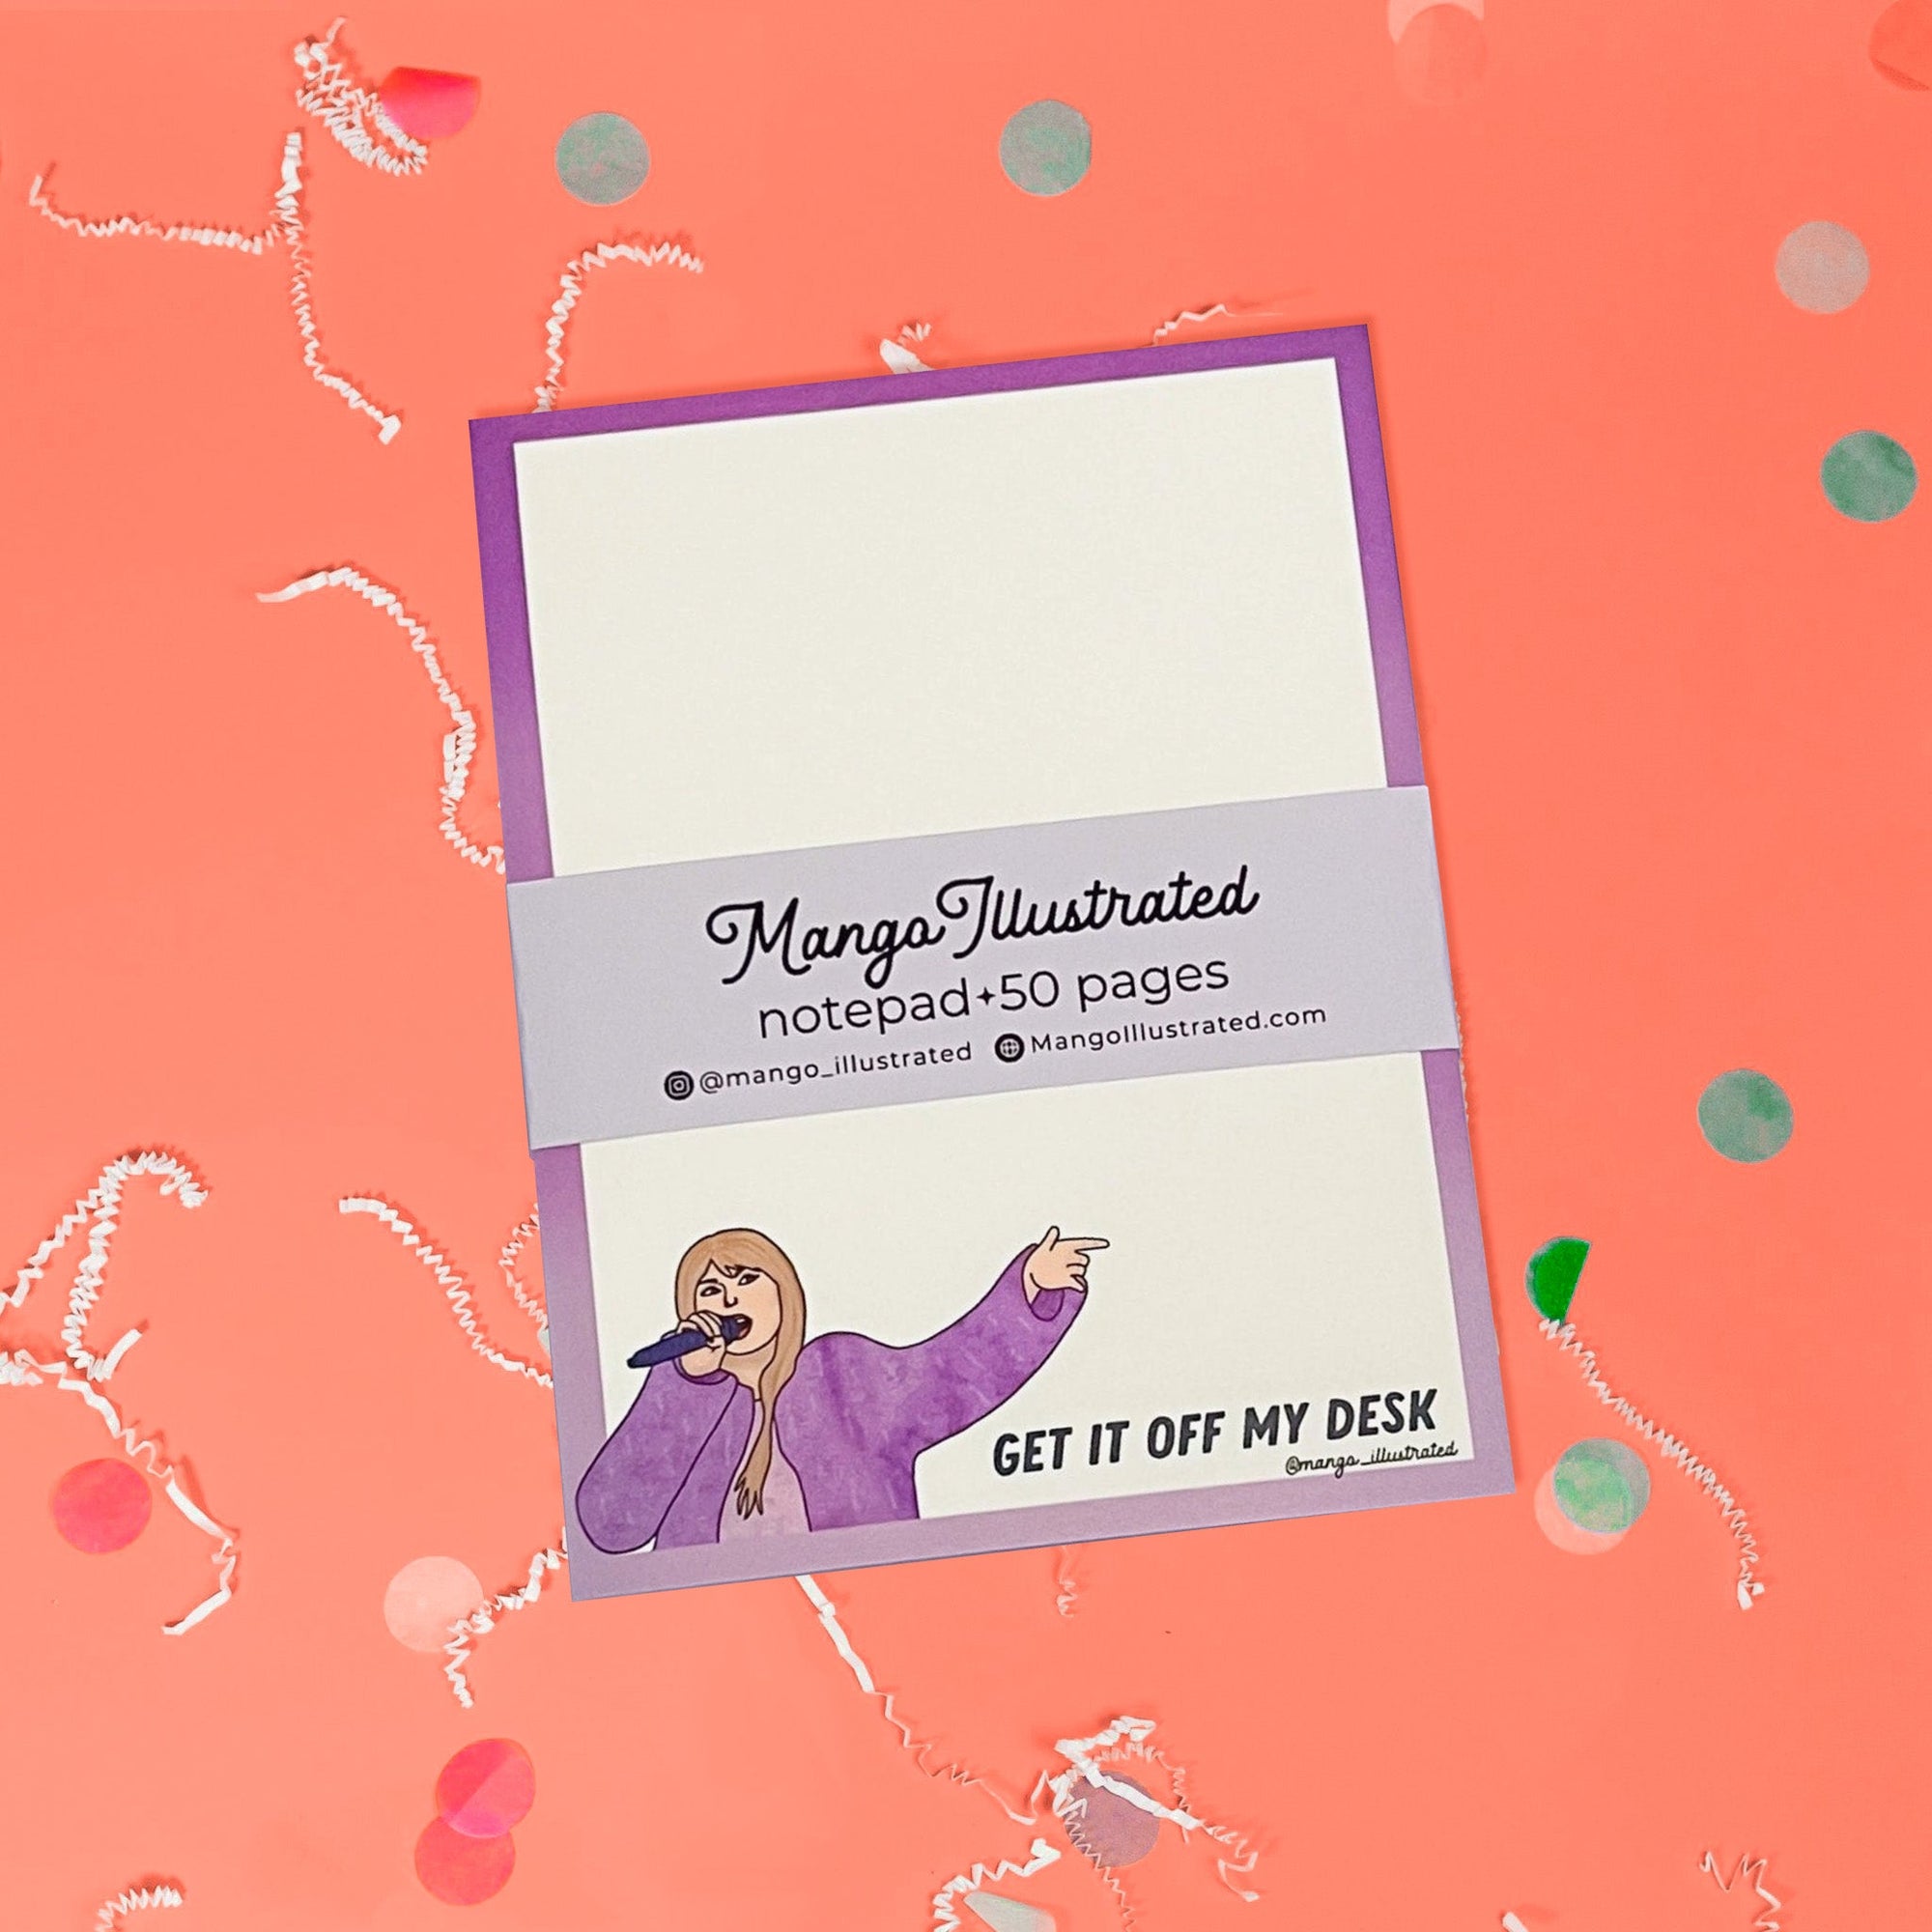 On a coral pink background sits a notepad with white crinkle and big, colorful confetti scattered around. This Taylor Swift inspired notepad is in purple shades with a white background and it says at the top "GET IT OFF MY DESK" in black lettering and there is an illustration of Taylor Swift at the bottom.